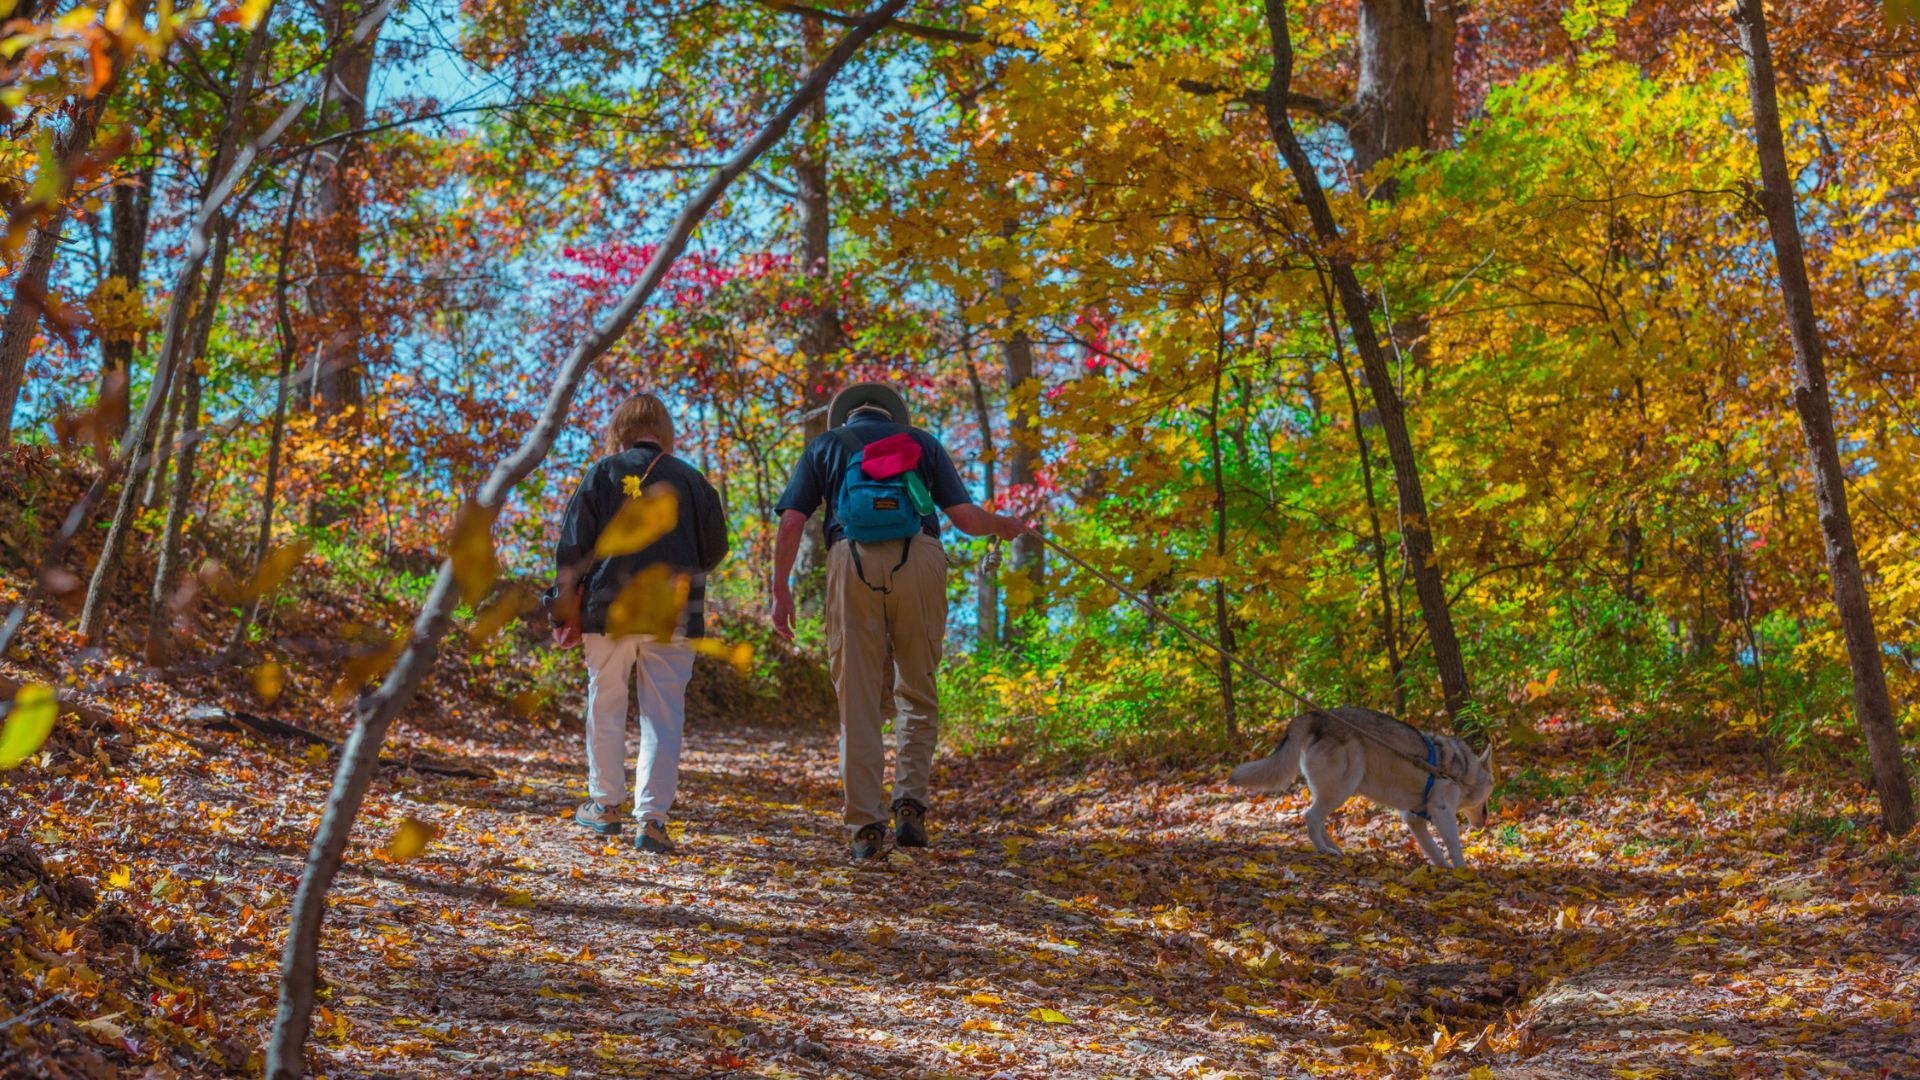 Hiking trails offer plenty of outdoor adventures in St. Louis.